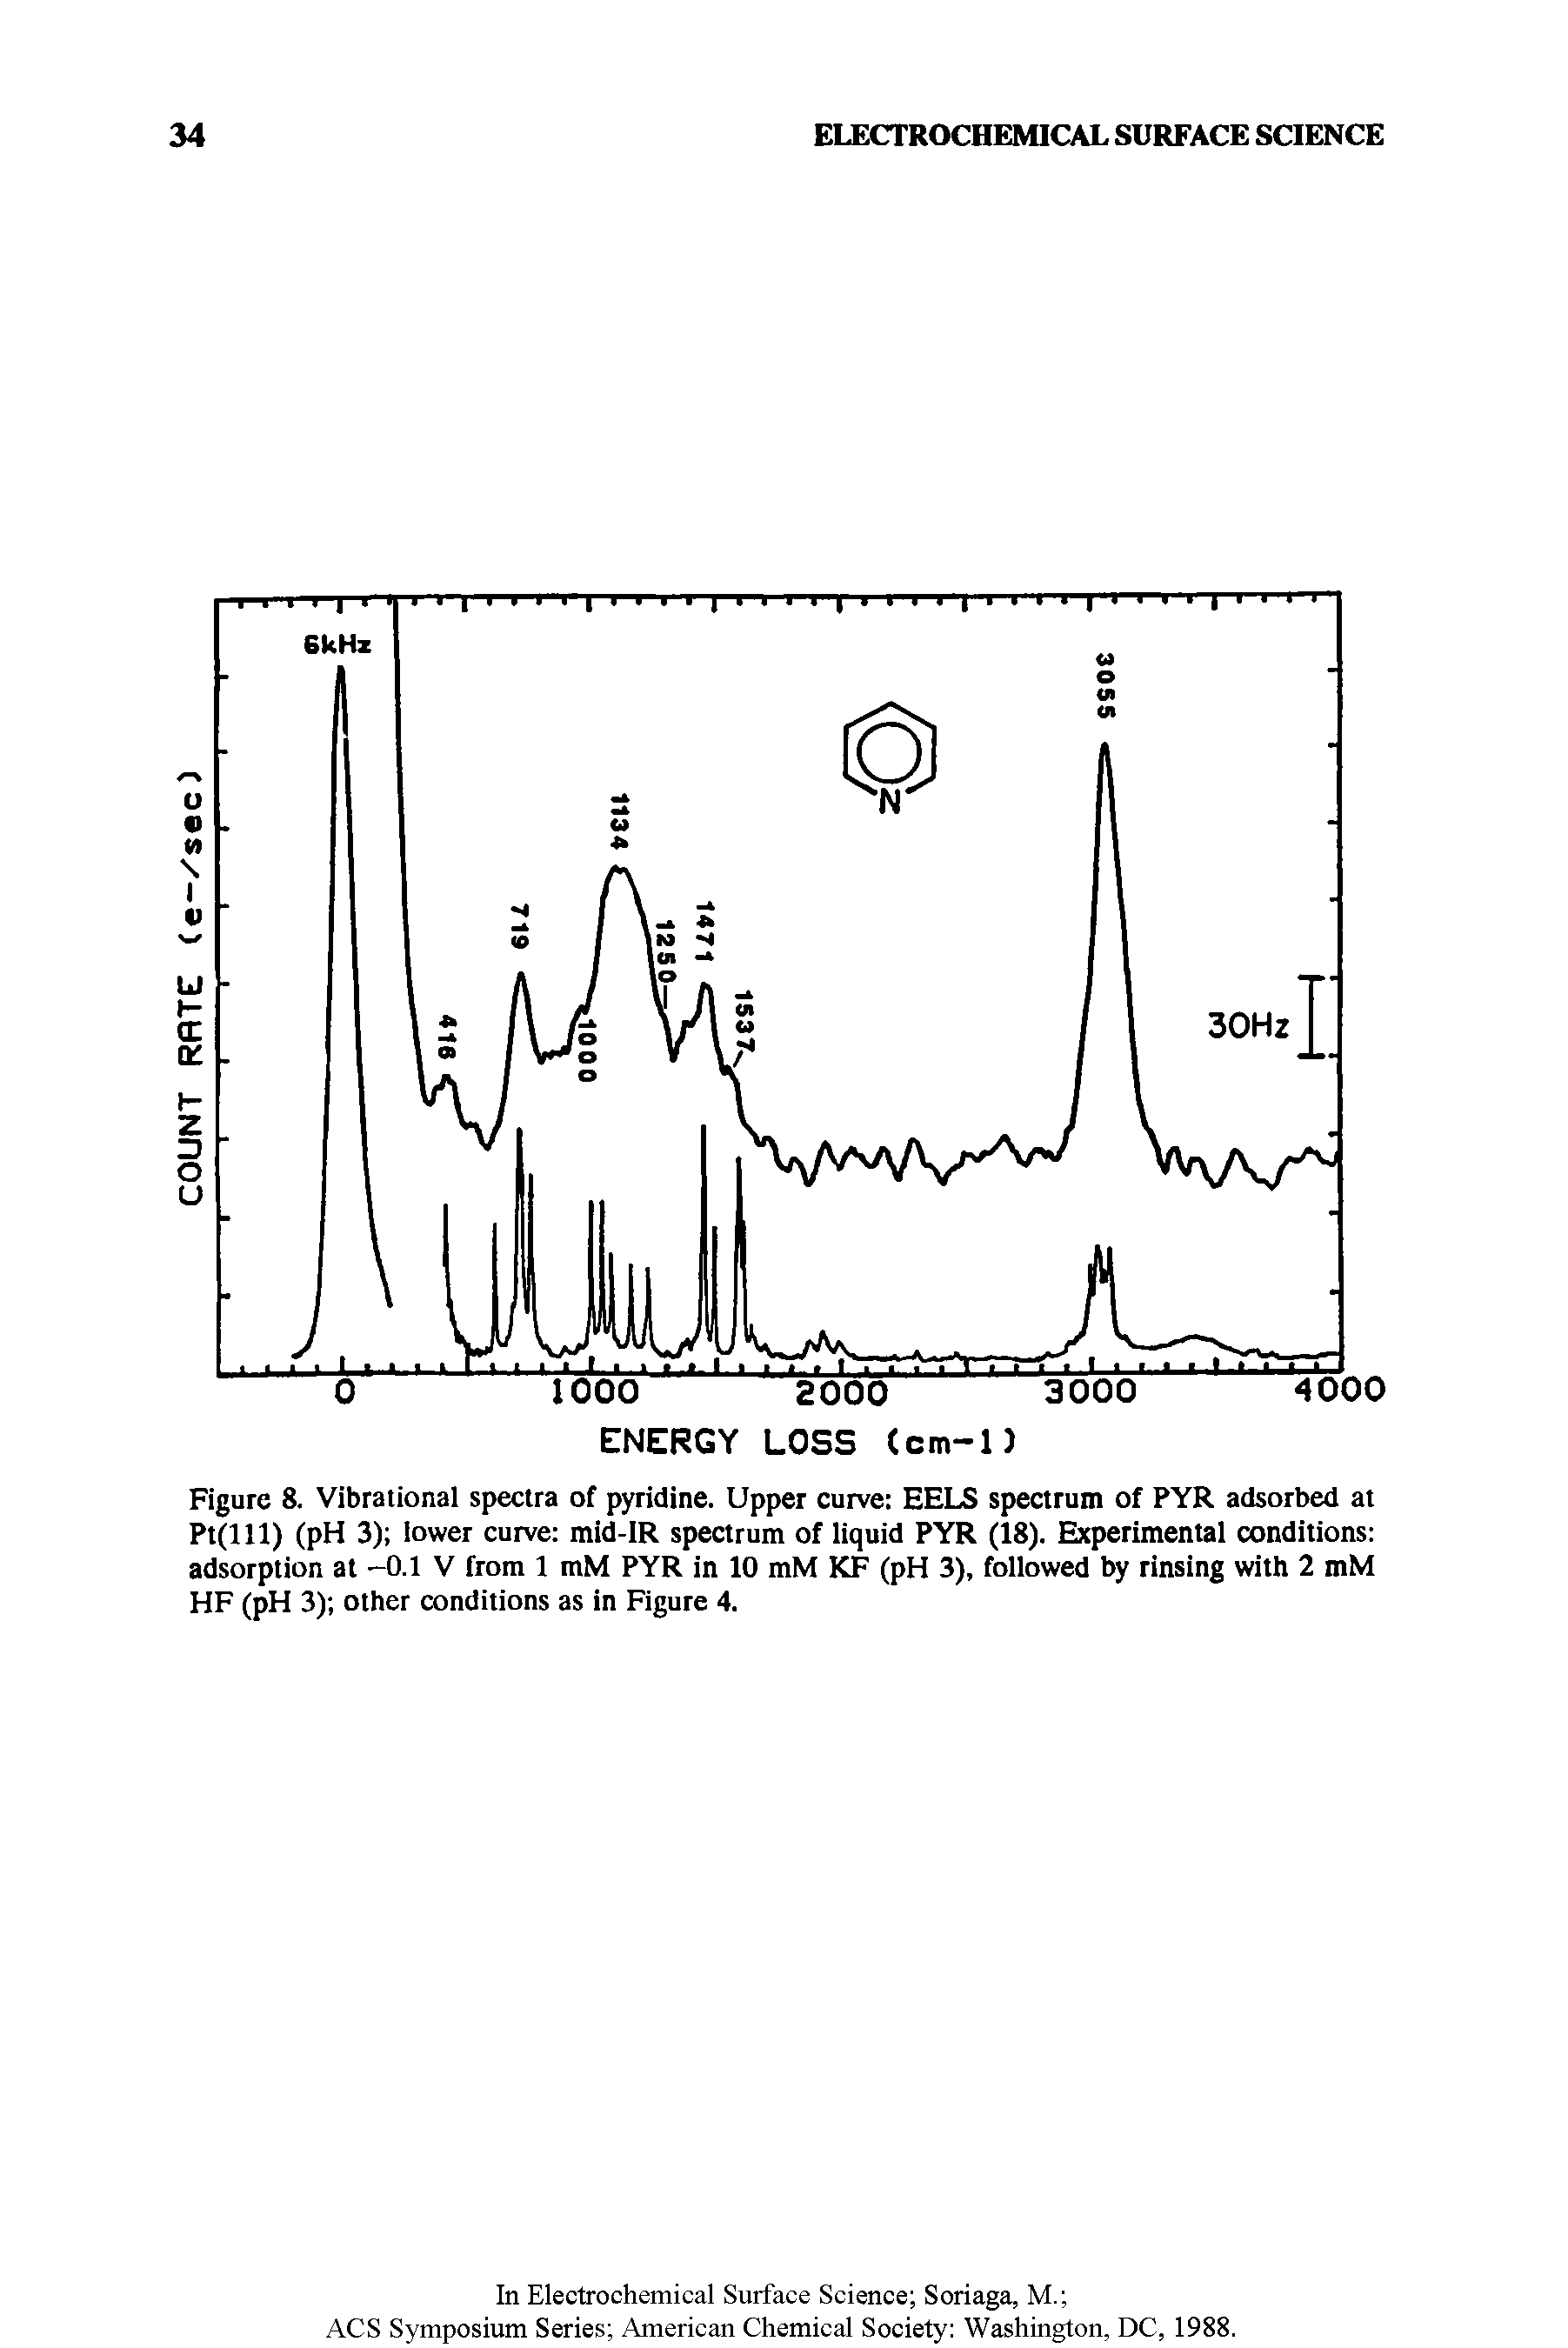 Figure 8. Vibrational spectra of pyridine. Upper curve EELS spectrum of PYR adsorbed at Pt(lll) (pH 3) lower curve mid-IR spectrum of liquid PYR (18). Experimental conditions adsorption at -0.1 V from 1 mM PYR in 10 mM KF (pH 3), followed by rinsing with 2 mM HF (pH 3) other conditions as in Figure 4.